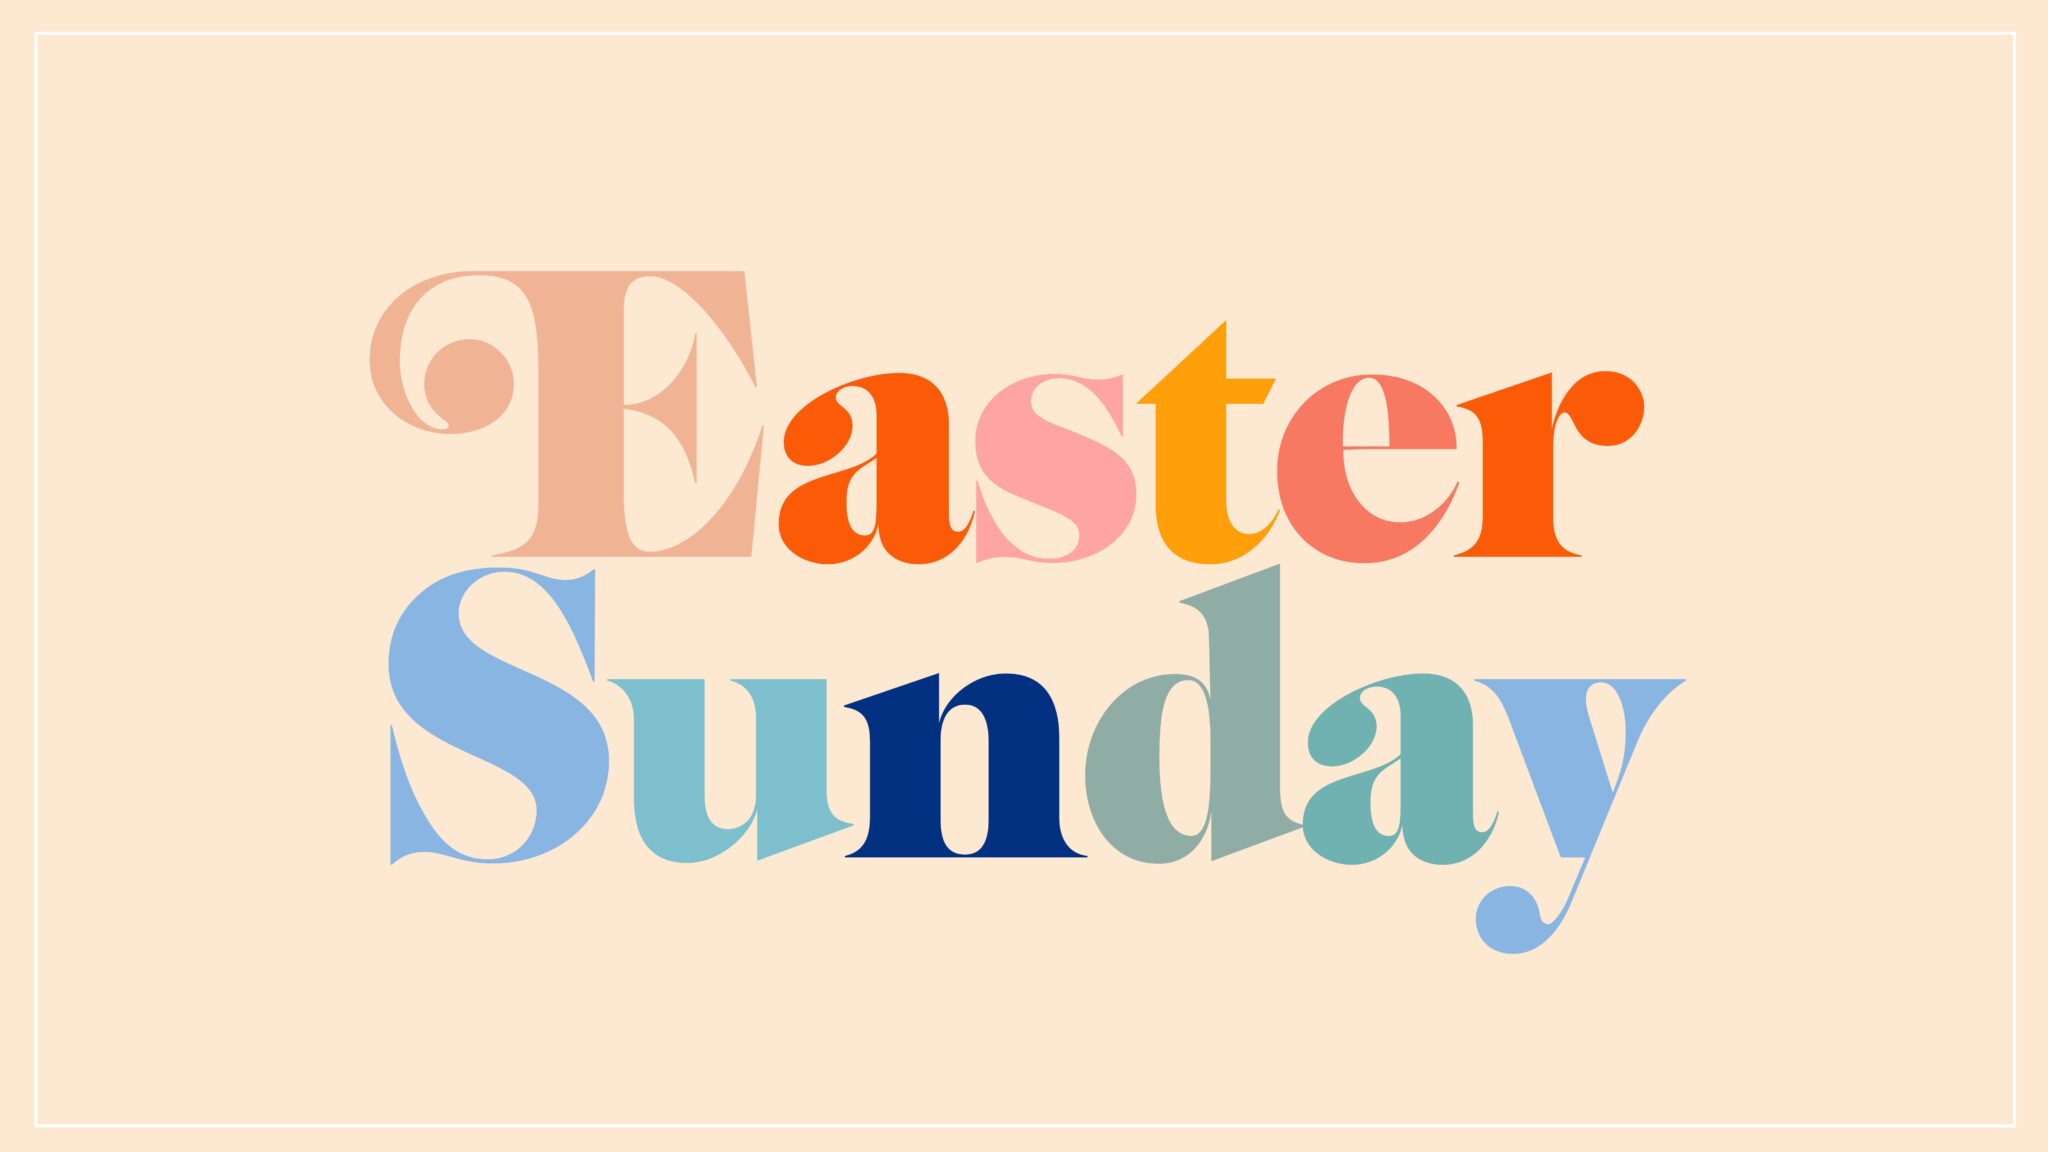 Easter Sunday graphic in different colored text